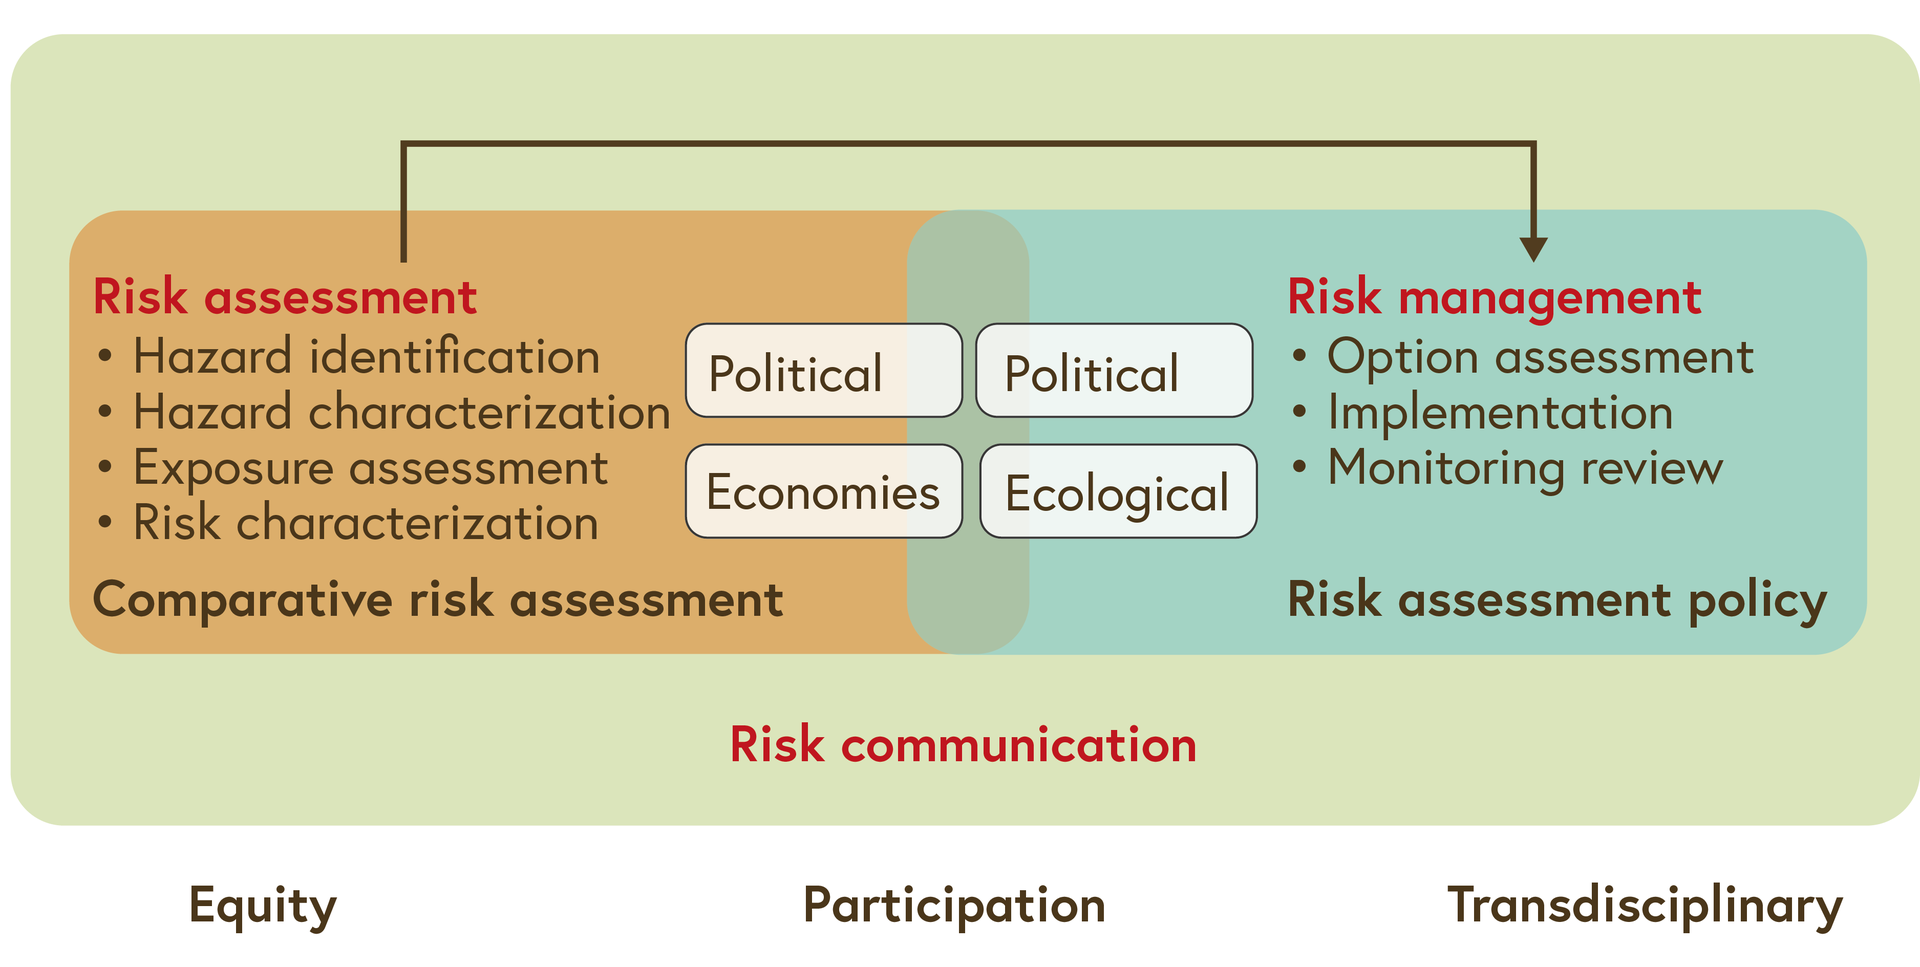 The framework for participatory risk analysis is depicted.